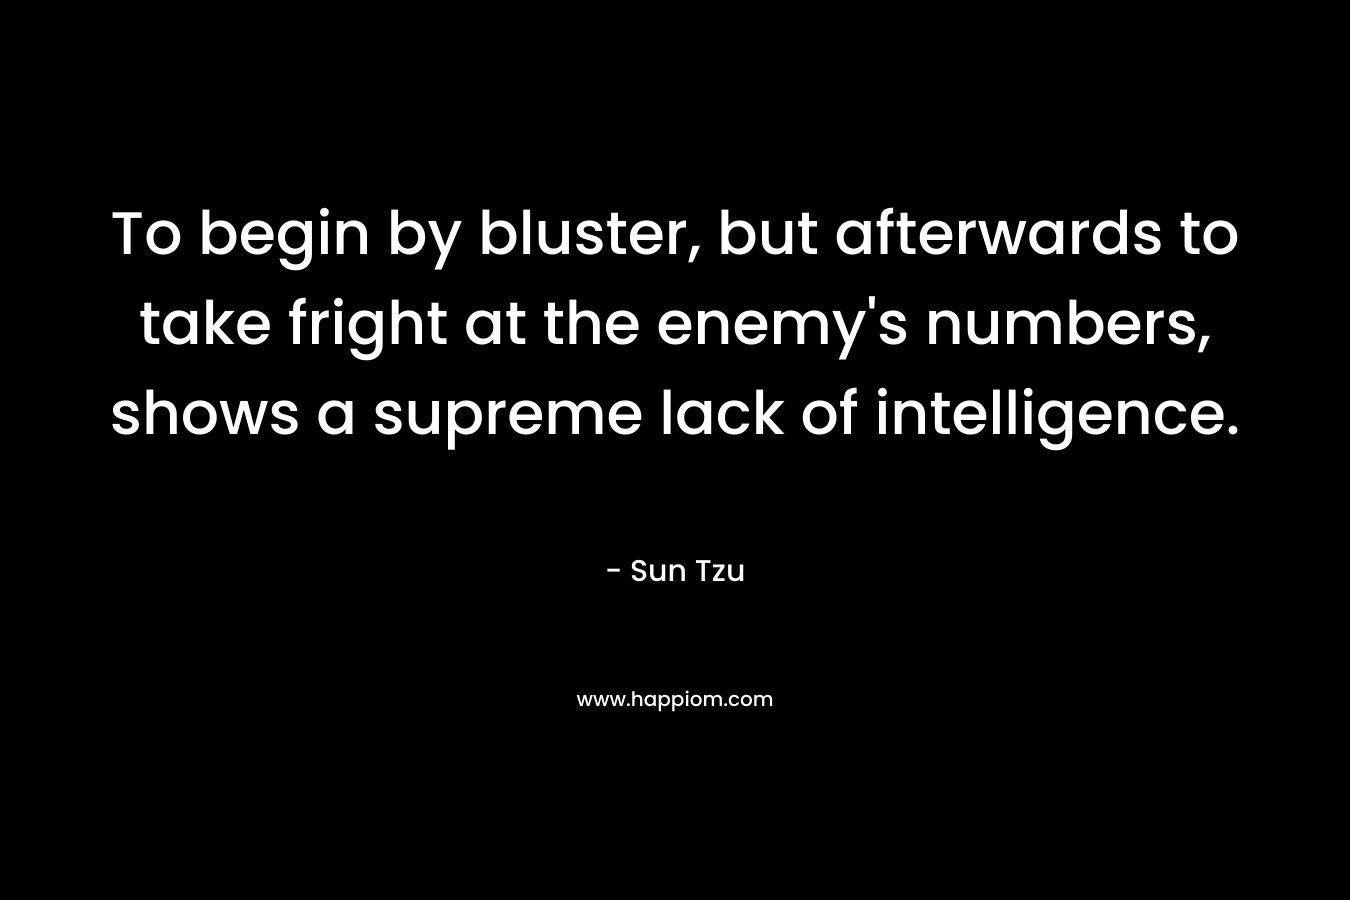 To begin by bluster, but afterwards to take fright at the enemy’s numbers, shows a supreme lack of intelligence. – Sun Tzu